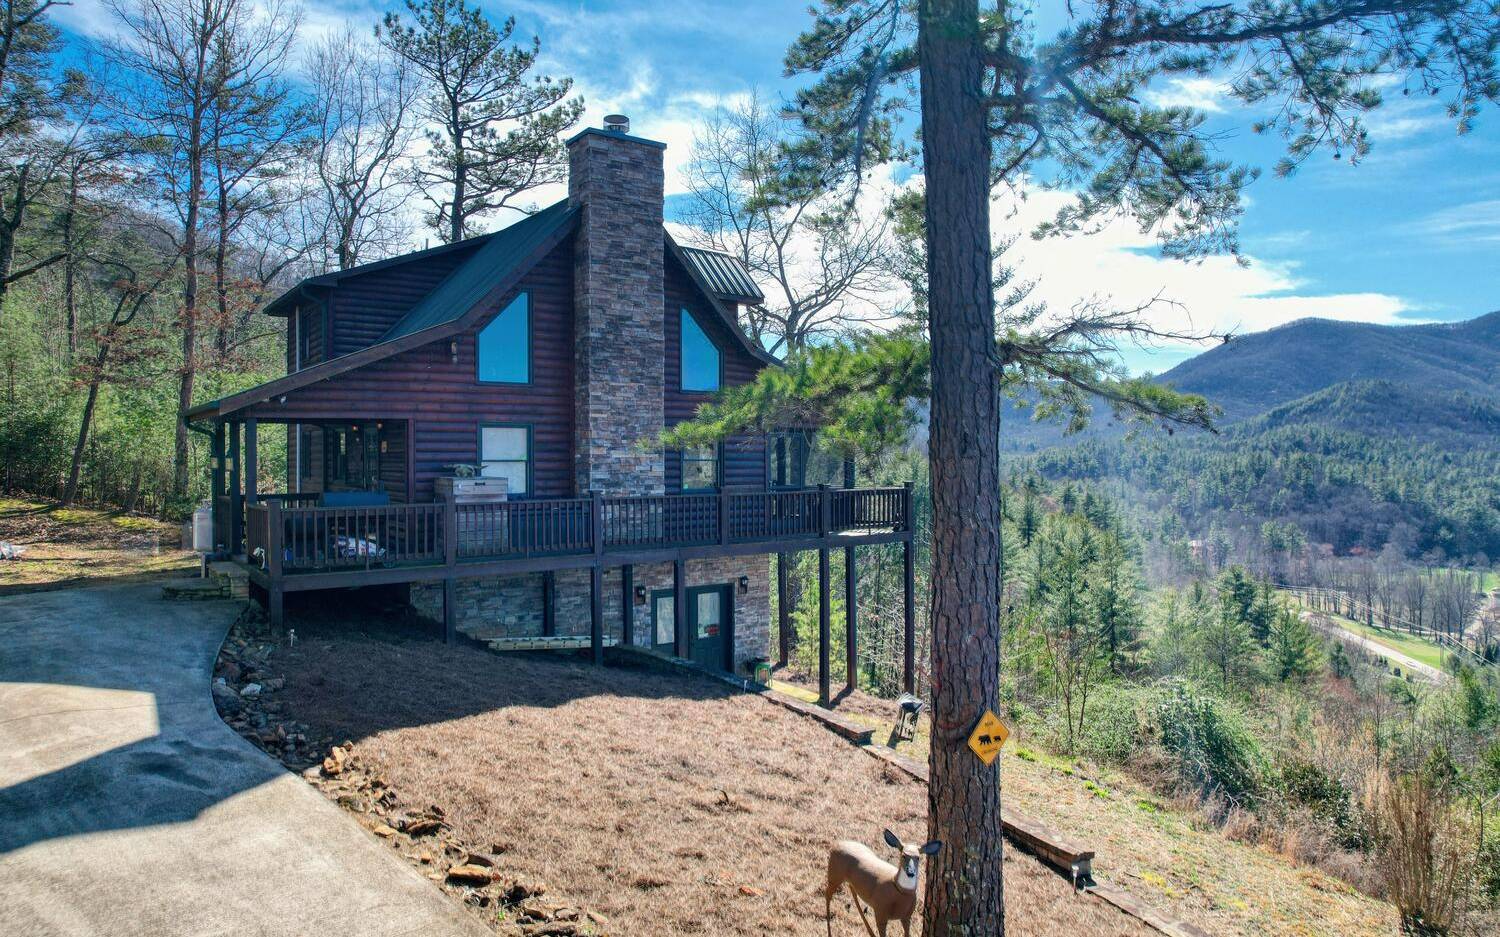 Amazing long range year round mountain views that will never be blocked by another home. 3 bedroom 3 bath sold furnished cabin in the Northeast Georgia Mountains. Concrete drive (which is a little steep). Home features screened in front porch, floor to ceiling fireplace with beautiful rock work. Flooring is white pine, High cathedral ceilings. Master bedroom on upper level but could also make the main level bedroom your master. Finished basement comes complete with a wet bar, lower level would be perfect for a man cave or even a woman cave, whatever you want to make of it. Views from all levels of home. If you like your privacy this is the perfect mountain home for you. Use as full time home or vacation home ( No restrictions on short term rentals). Only minutes from town and a close drive to Helen or Clayton Ga. 2 hours from Atlanta. If you love wildlife this home has an abundance of different wildlife to watch and enjoy!